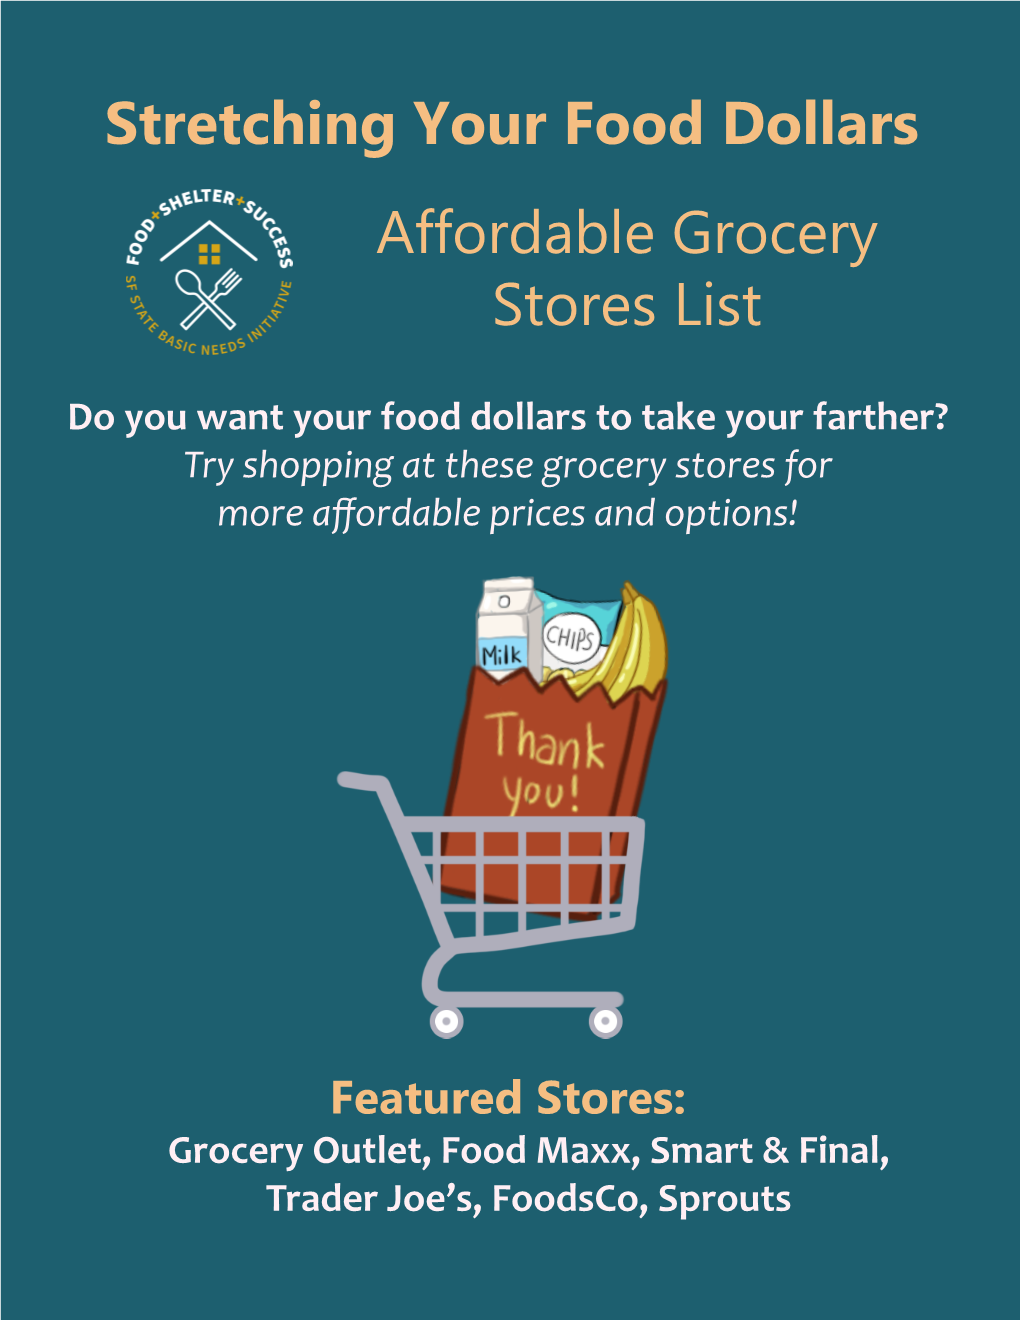 Stretching Your Food Dollars Affordable Grocery Stores List